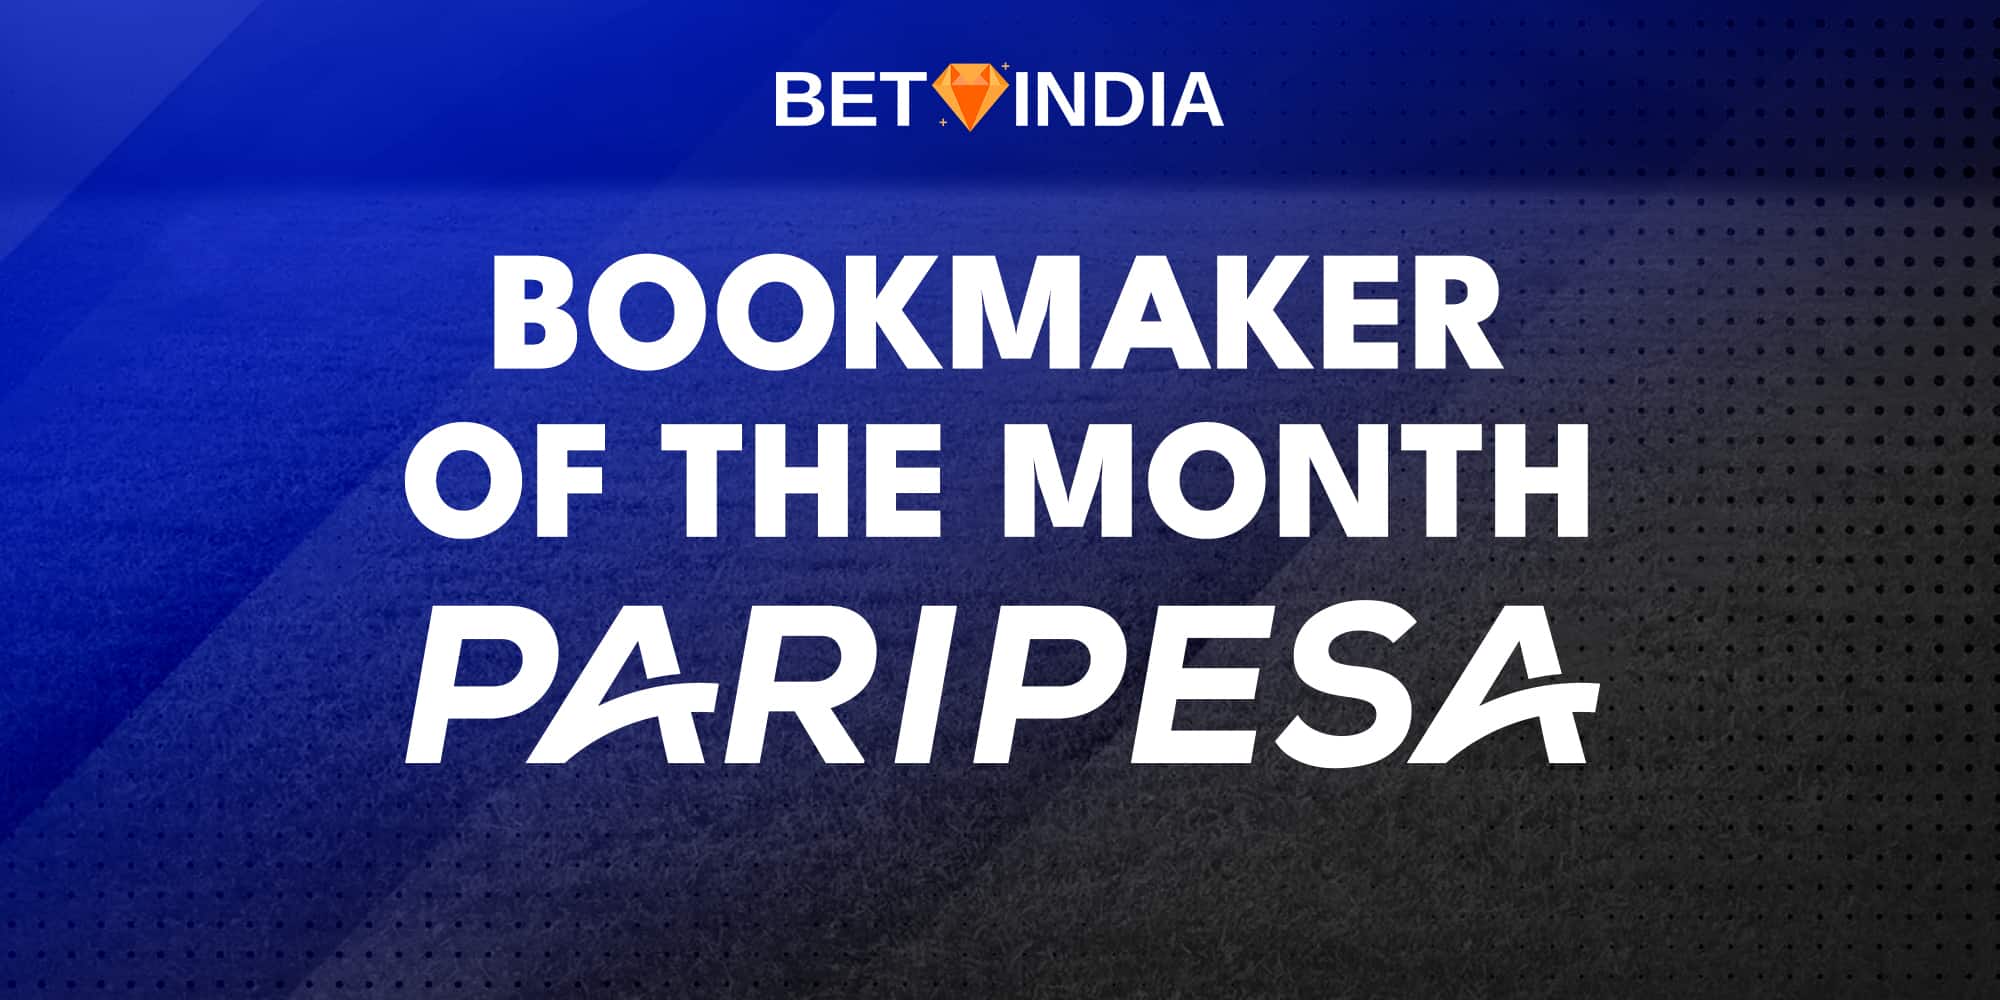 Bookmaker of the month - Paripesa